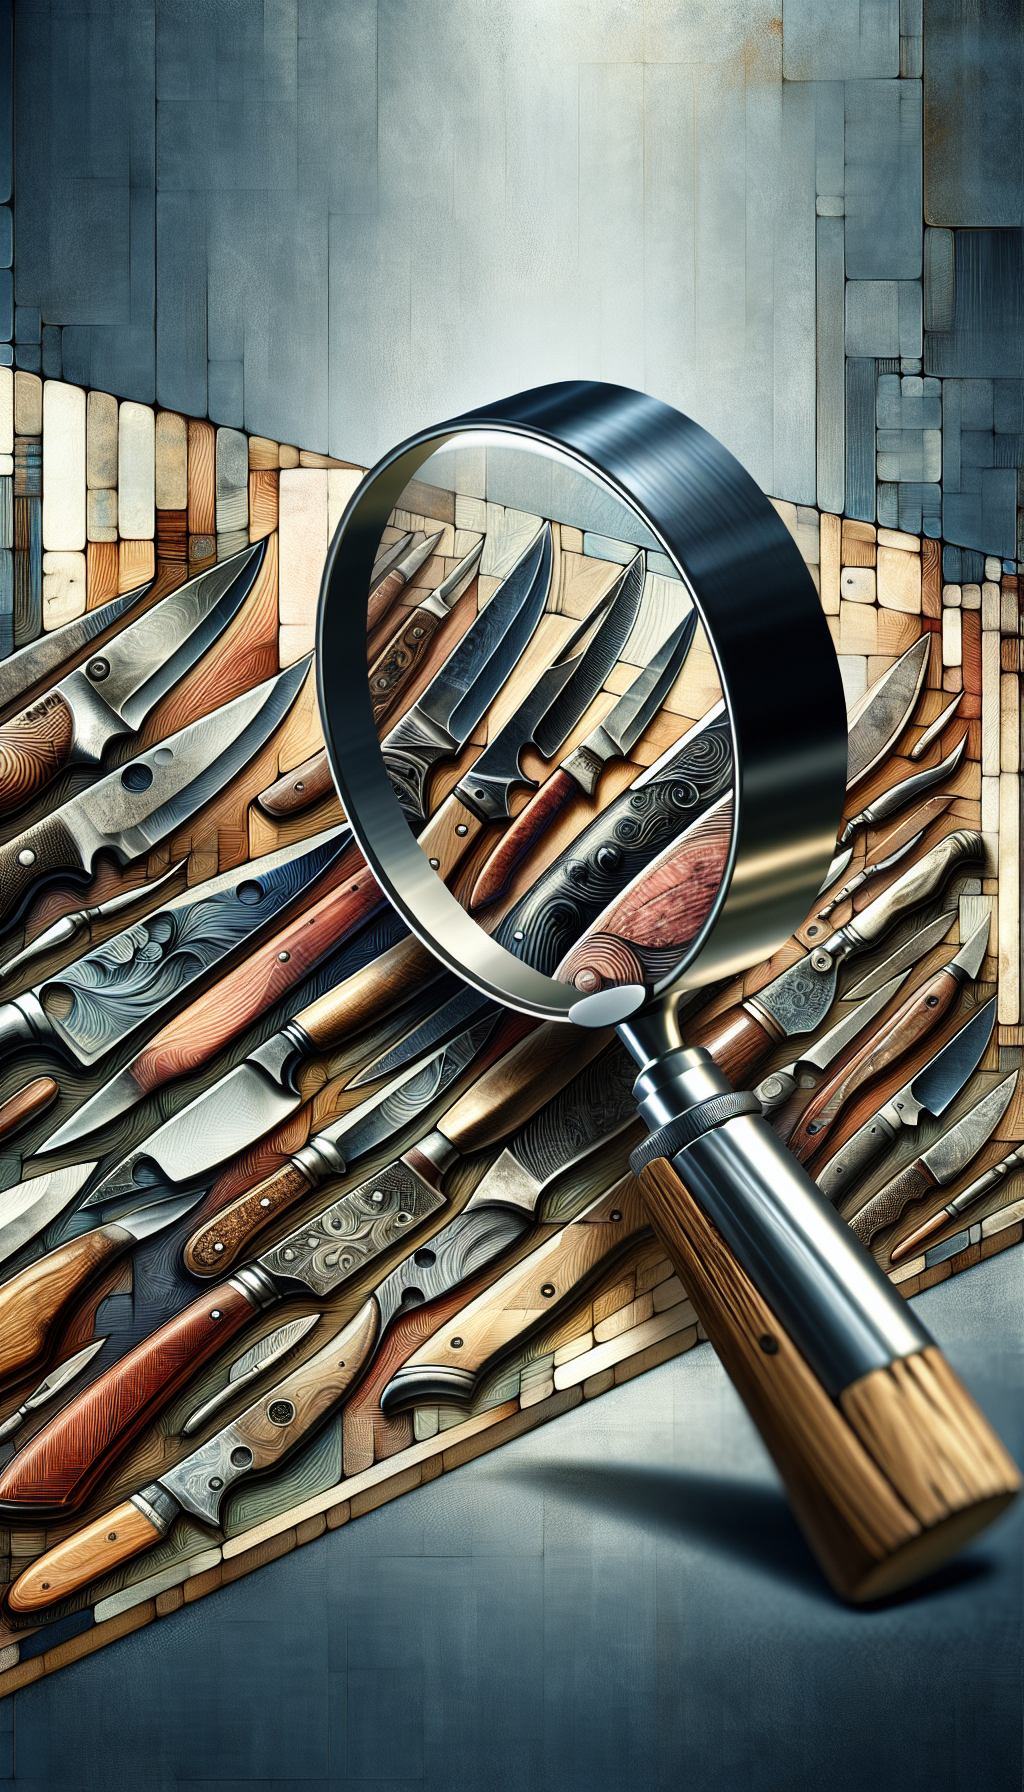 A magnifying glass hovers over an intricate array of antique knives, each blade etched with the distinct hallmark of its creator. The magnifying lens, a window revealing the fine details of craftsmanship, contrasts with a stylized, semi-abstract background where the textures of wood, leather, and metal intertwine, symbolizing the hands-on artistry and historical depth of knife-making traditions.